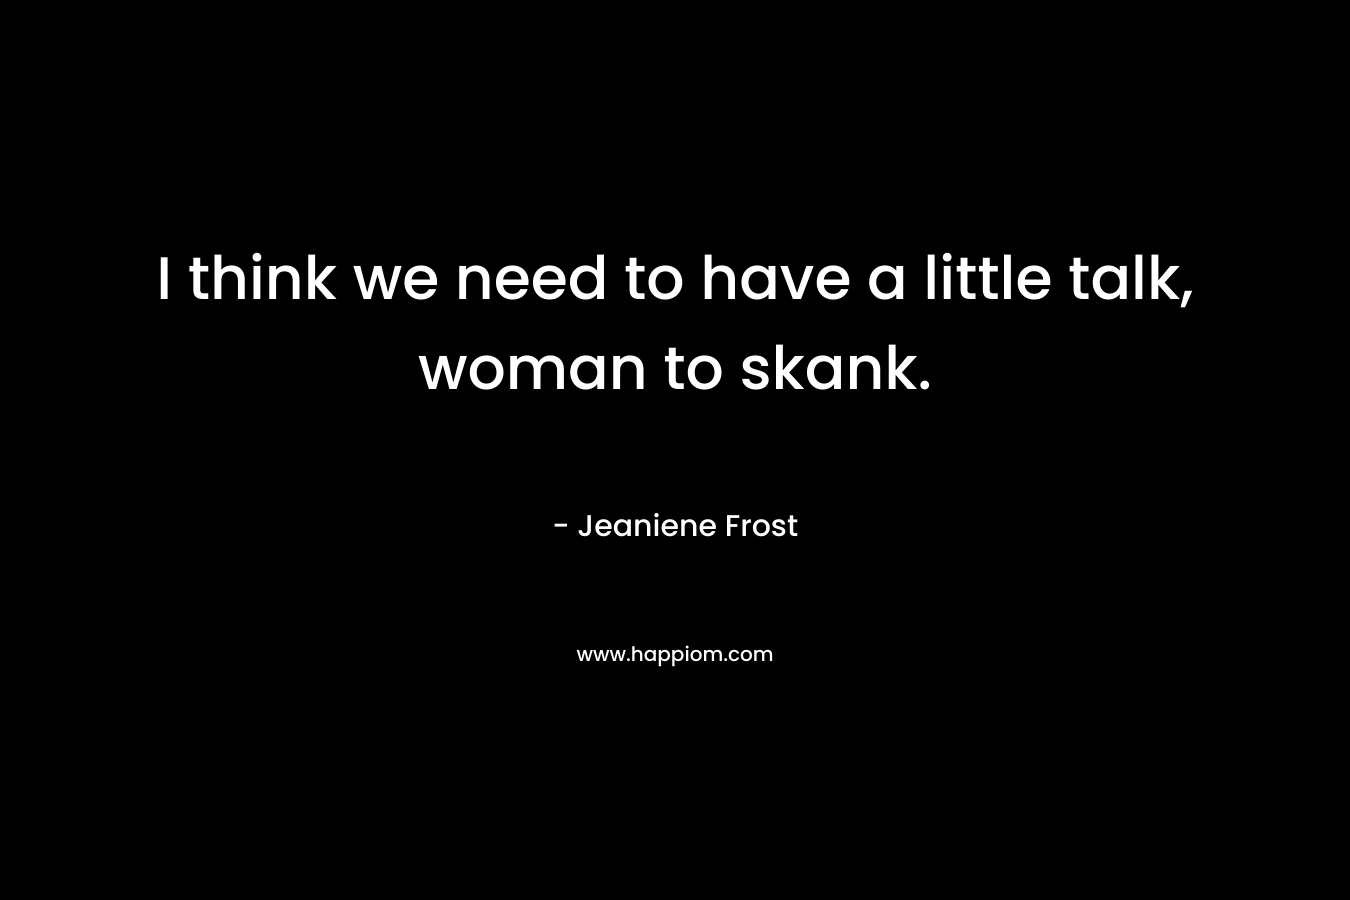 I think we need to have a little talk, woman to skank. – Jeaniene Frost